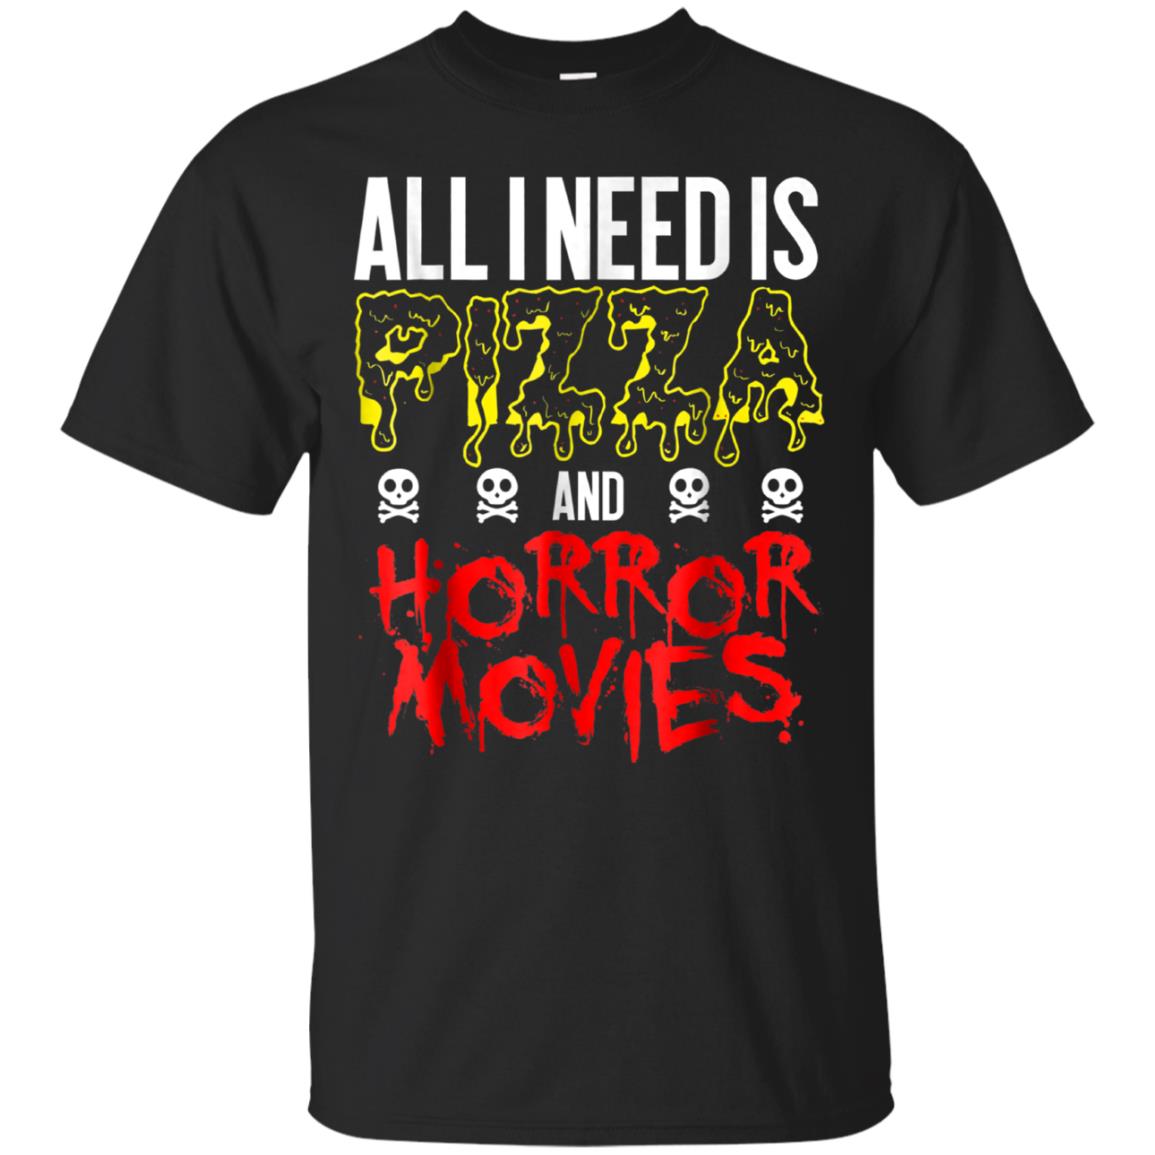 Horror Movie Pizza T-shirt All I Need For Halloween Graphic